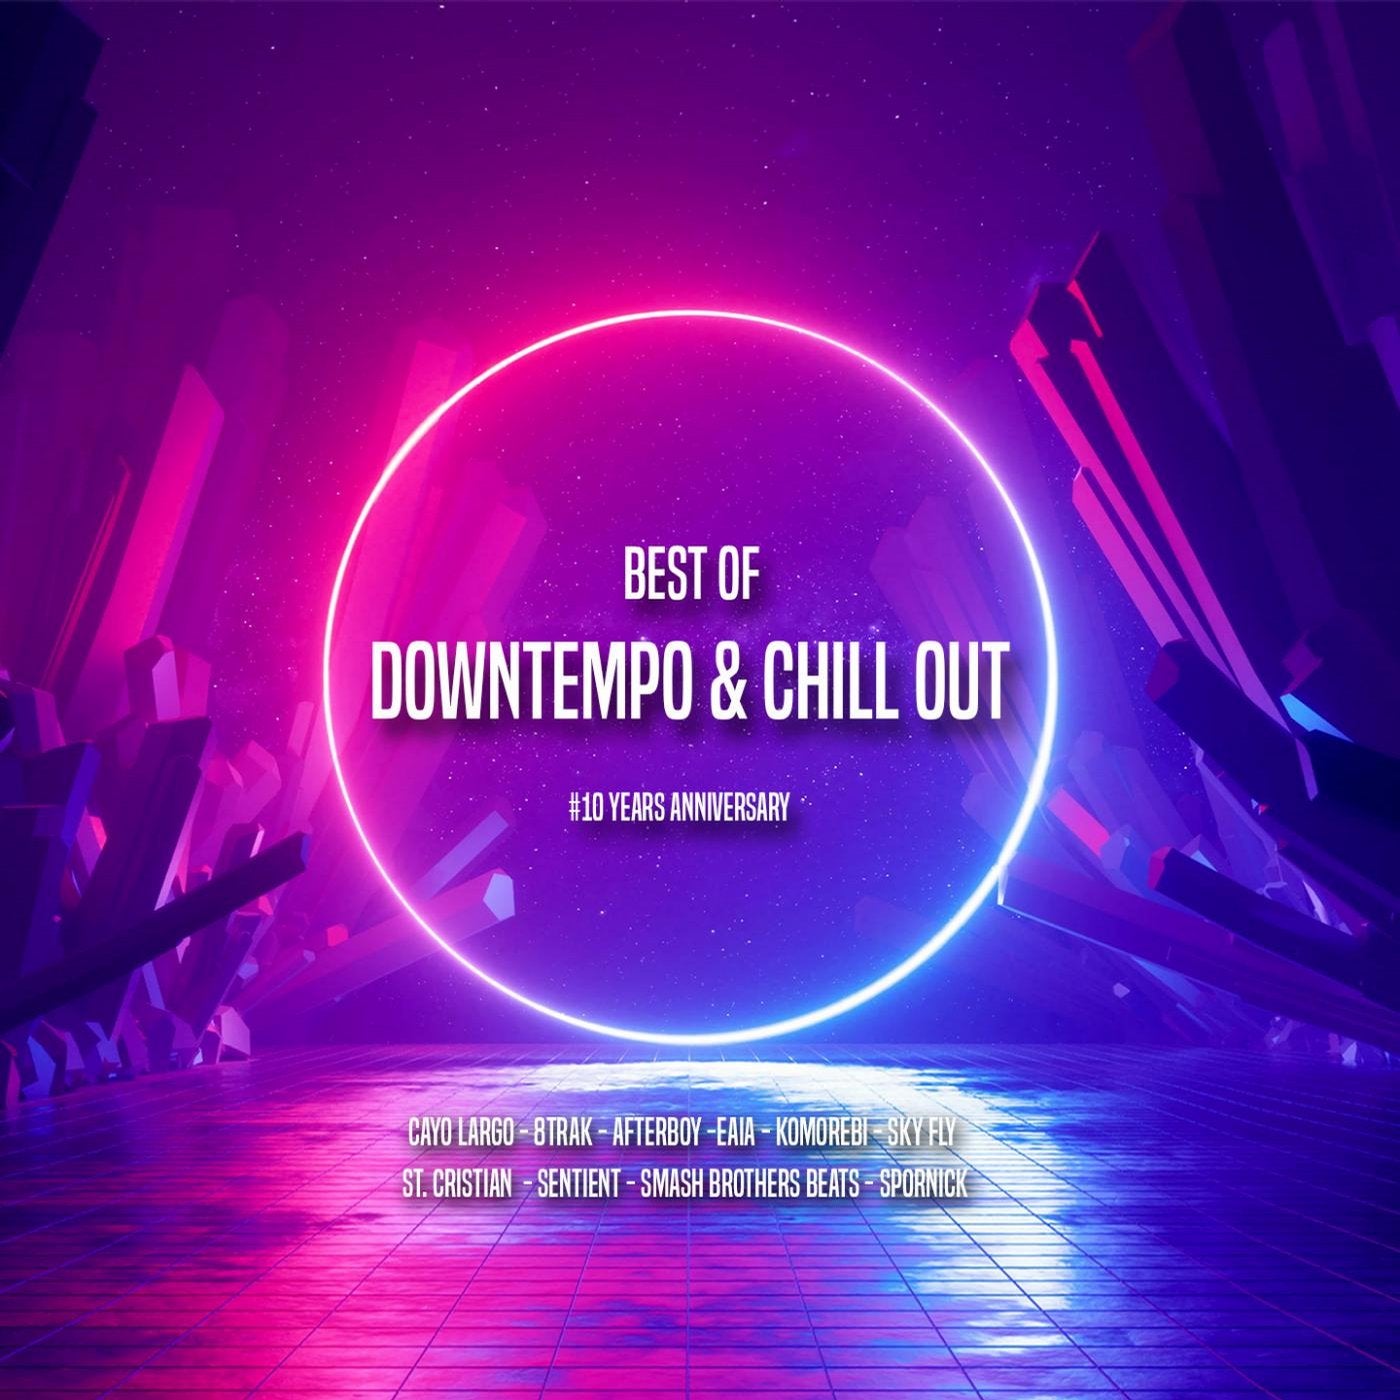 Best Of Downtempo & Chill Out - #10 Years Anniversary